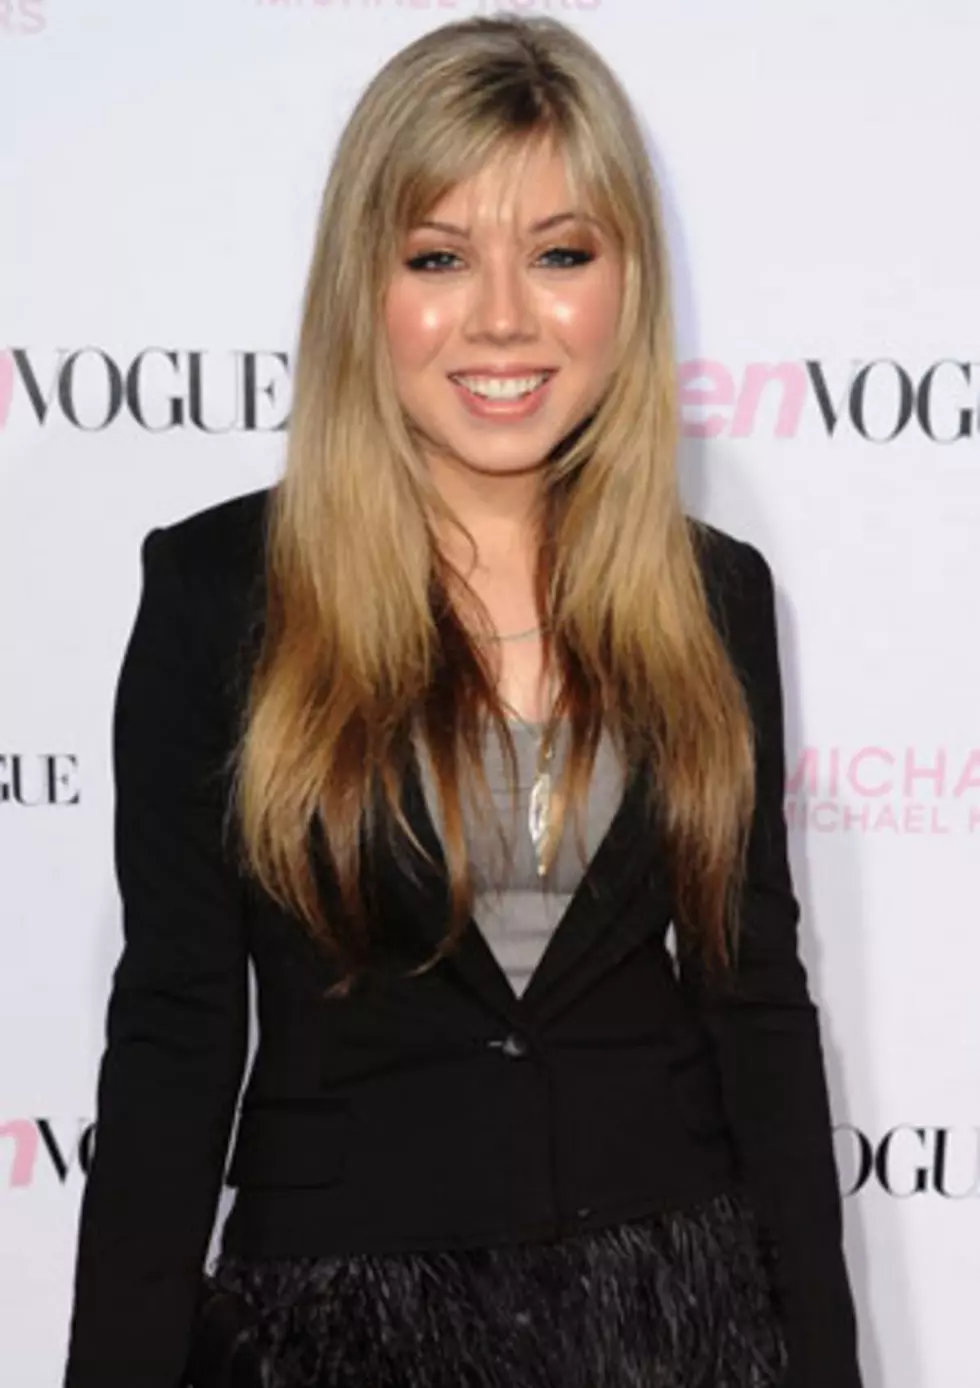 Jennette McCurdy Is Welcomed to Detroit by Screaming Fans